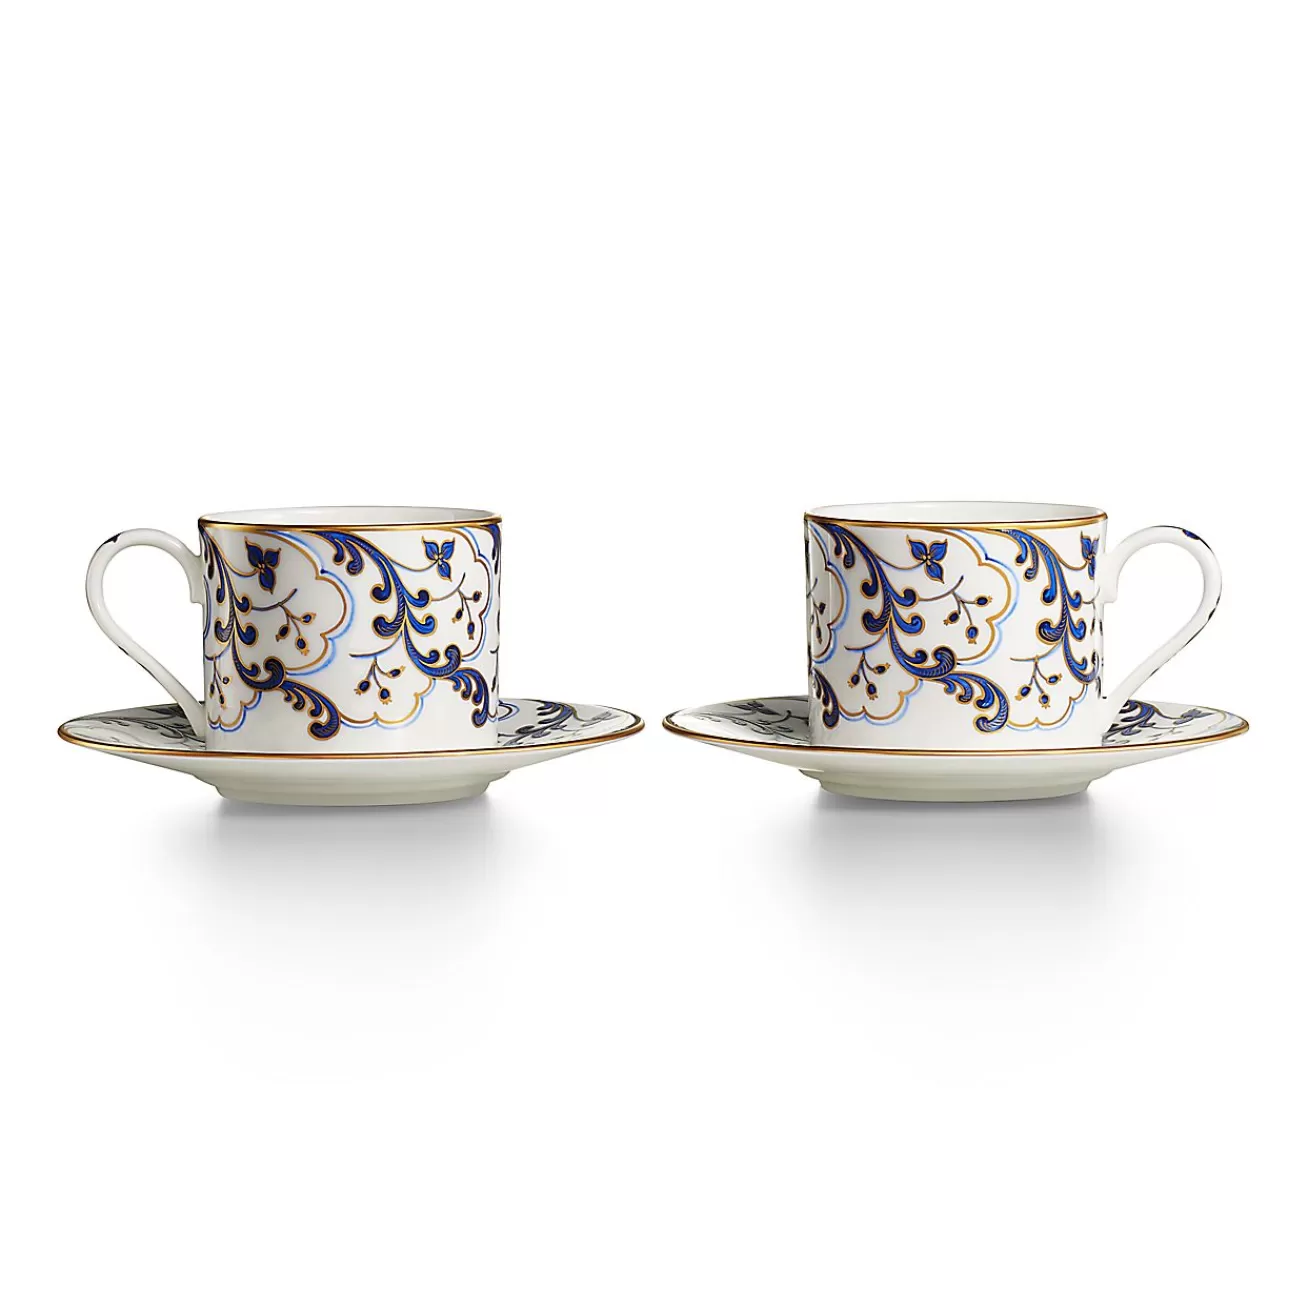 Tiffany & Co. Valse Bleue Teacup and Saucer in Bone China, Set of Two | ^ The Home | Housewarming Gifts